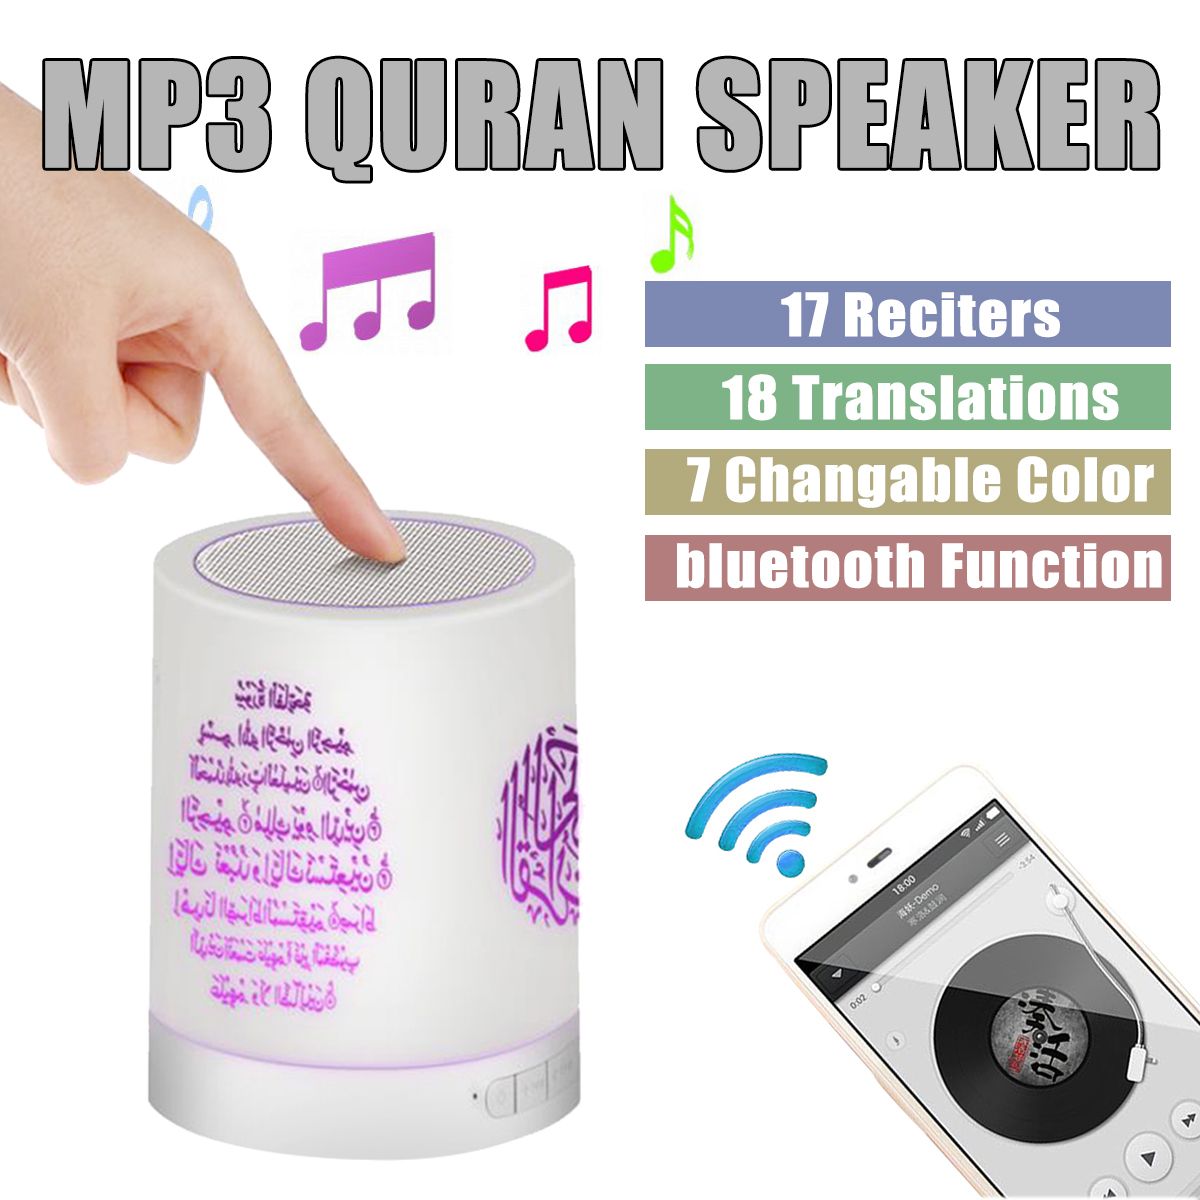 Bakeey-Portable-USB-Charging-Wireless-bluetooth-Colorful-Discoloration-Speaker-Remote-Control-Quran--1650378